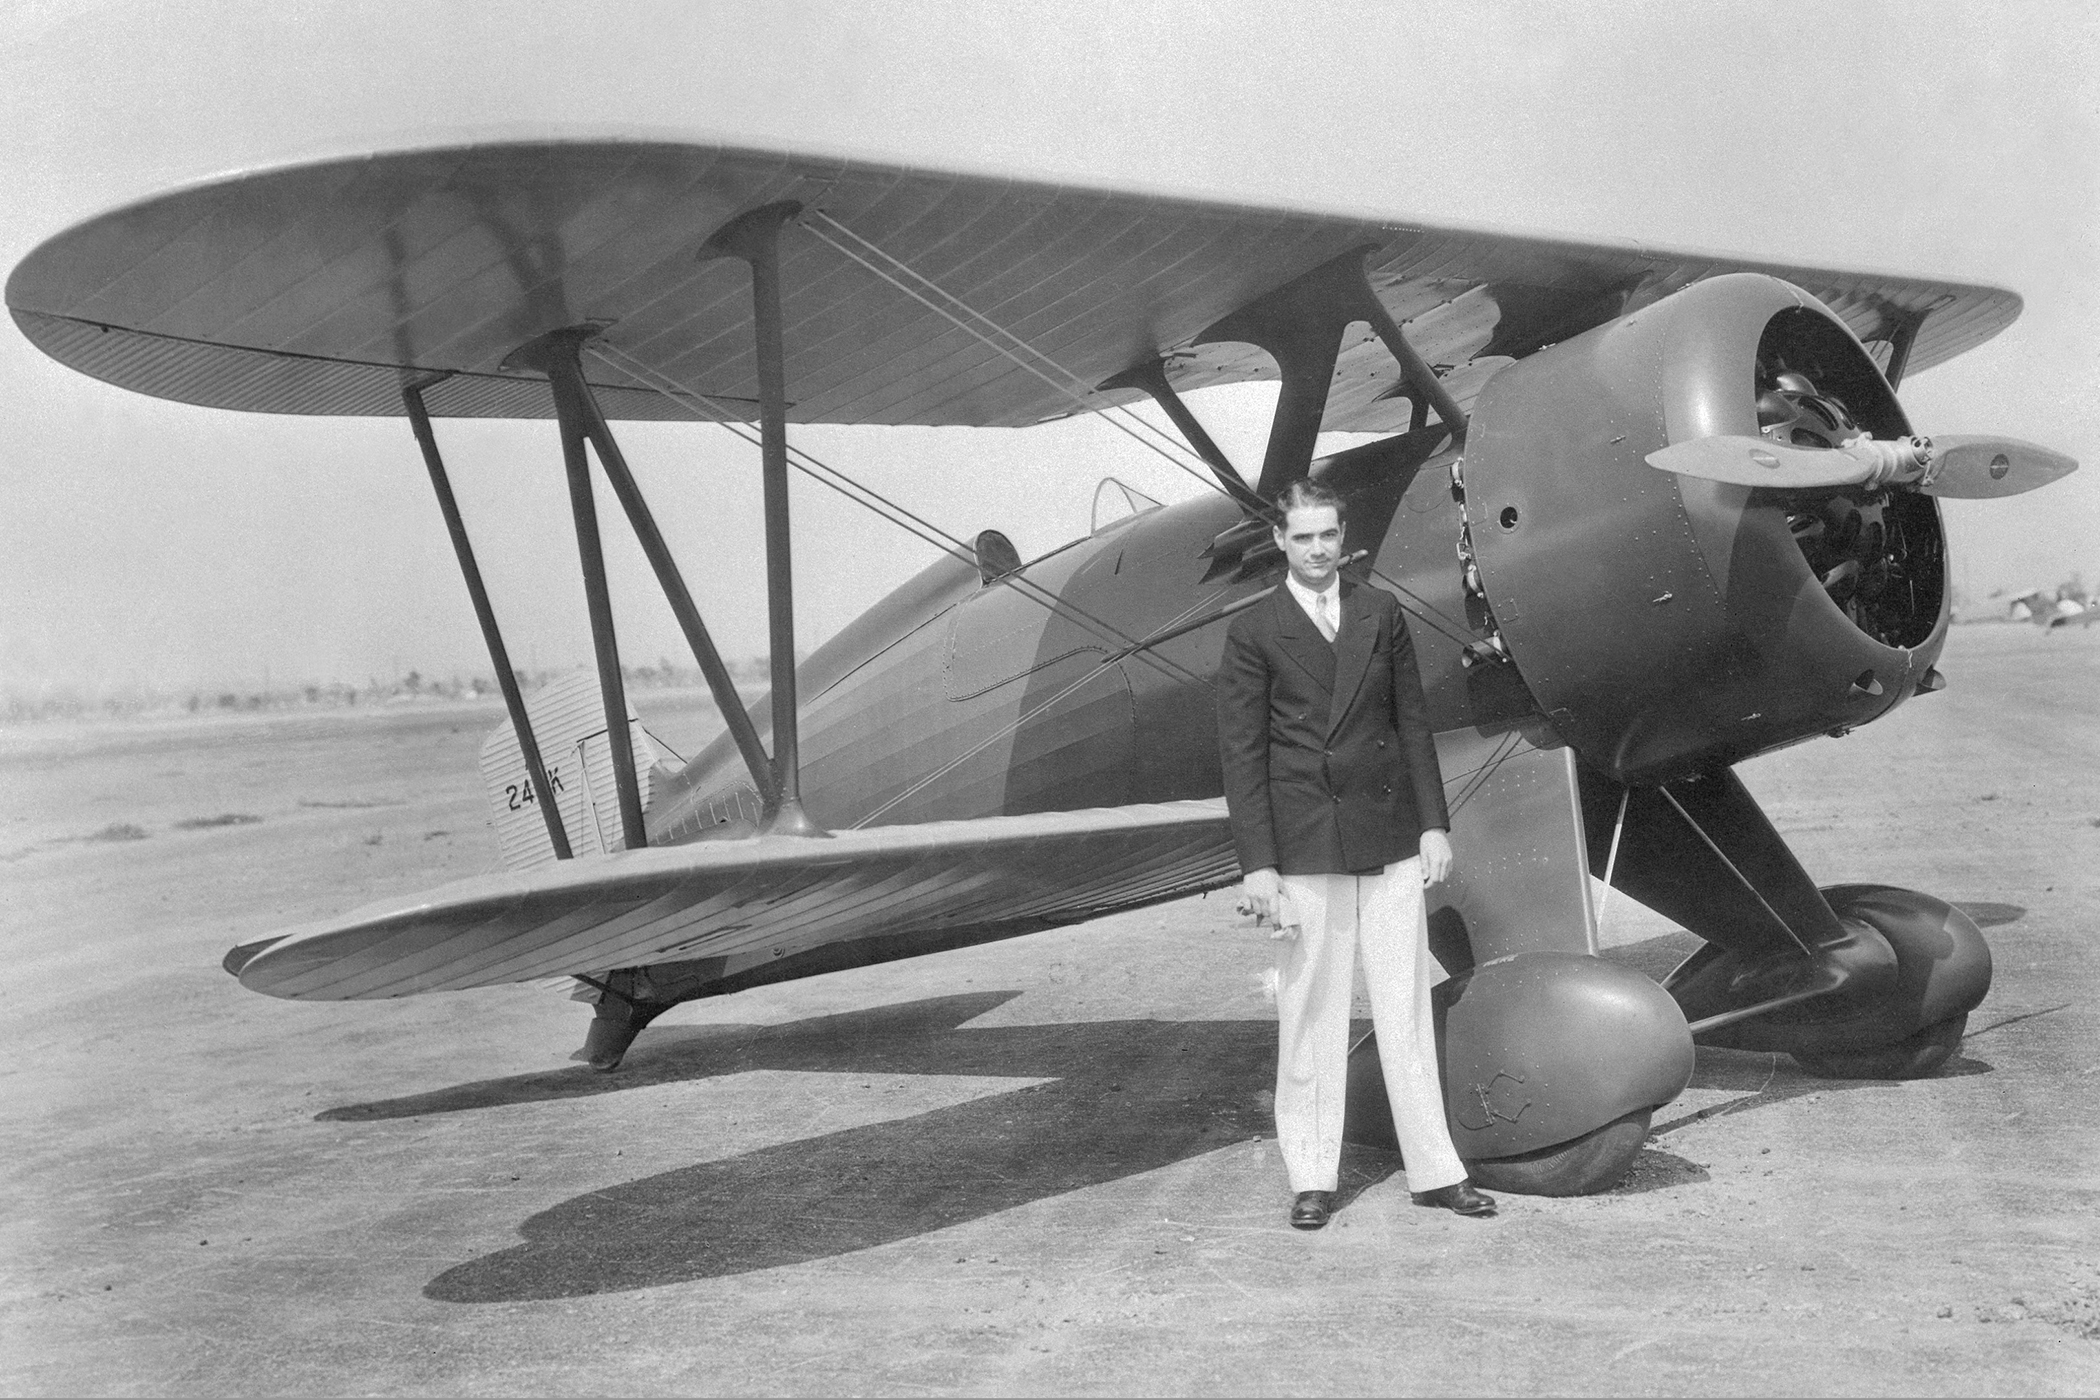 Howard Hughes, motion picture producer, shown after a test hop in his new high powered plane, a Boeing Army pursuit ship. Hughes is said to be the only private individual to own and pilot an Army plane.